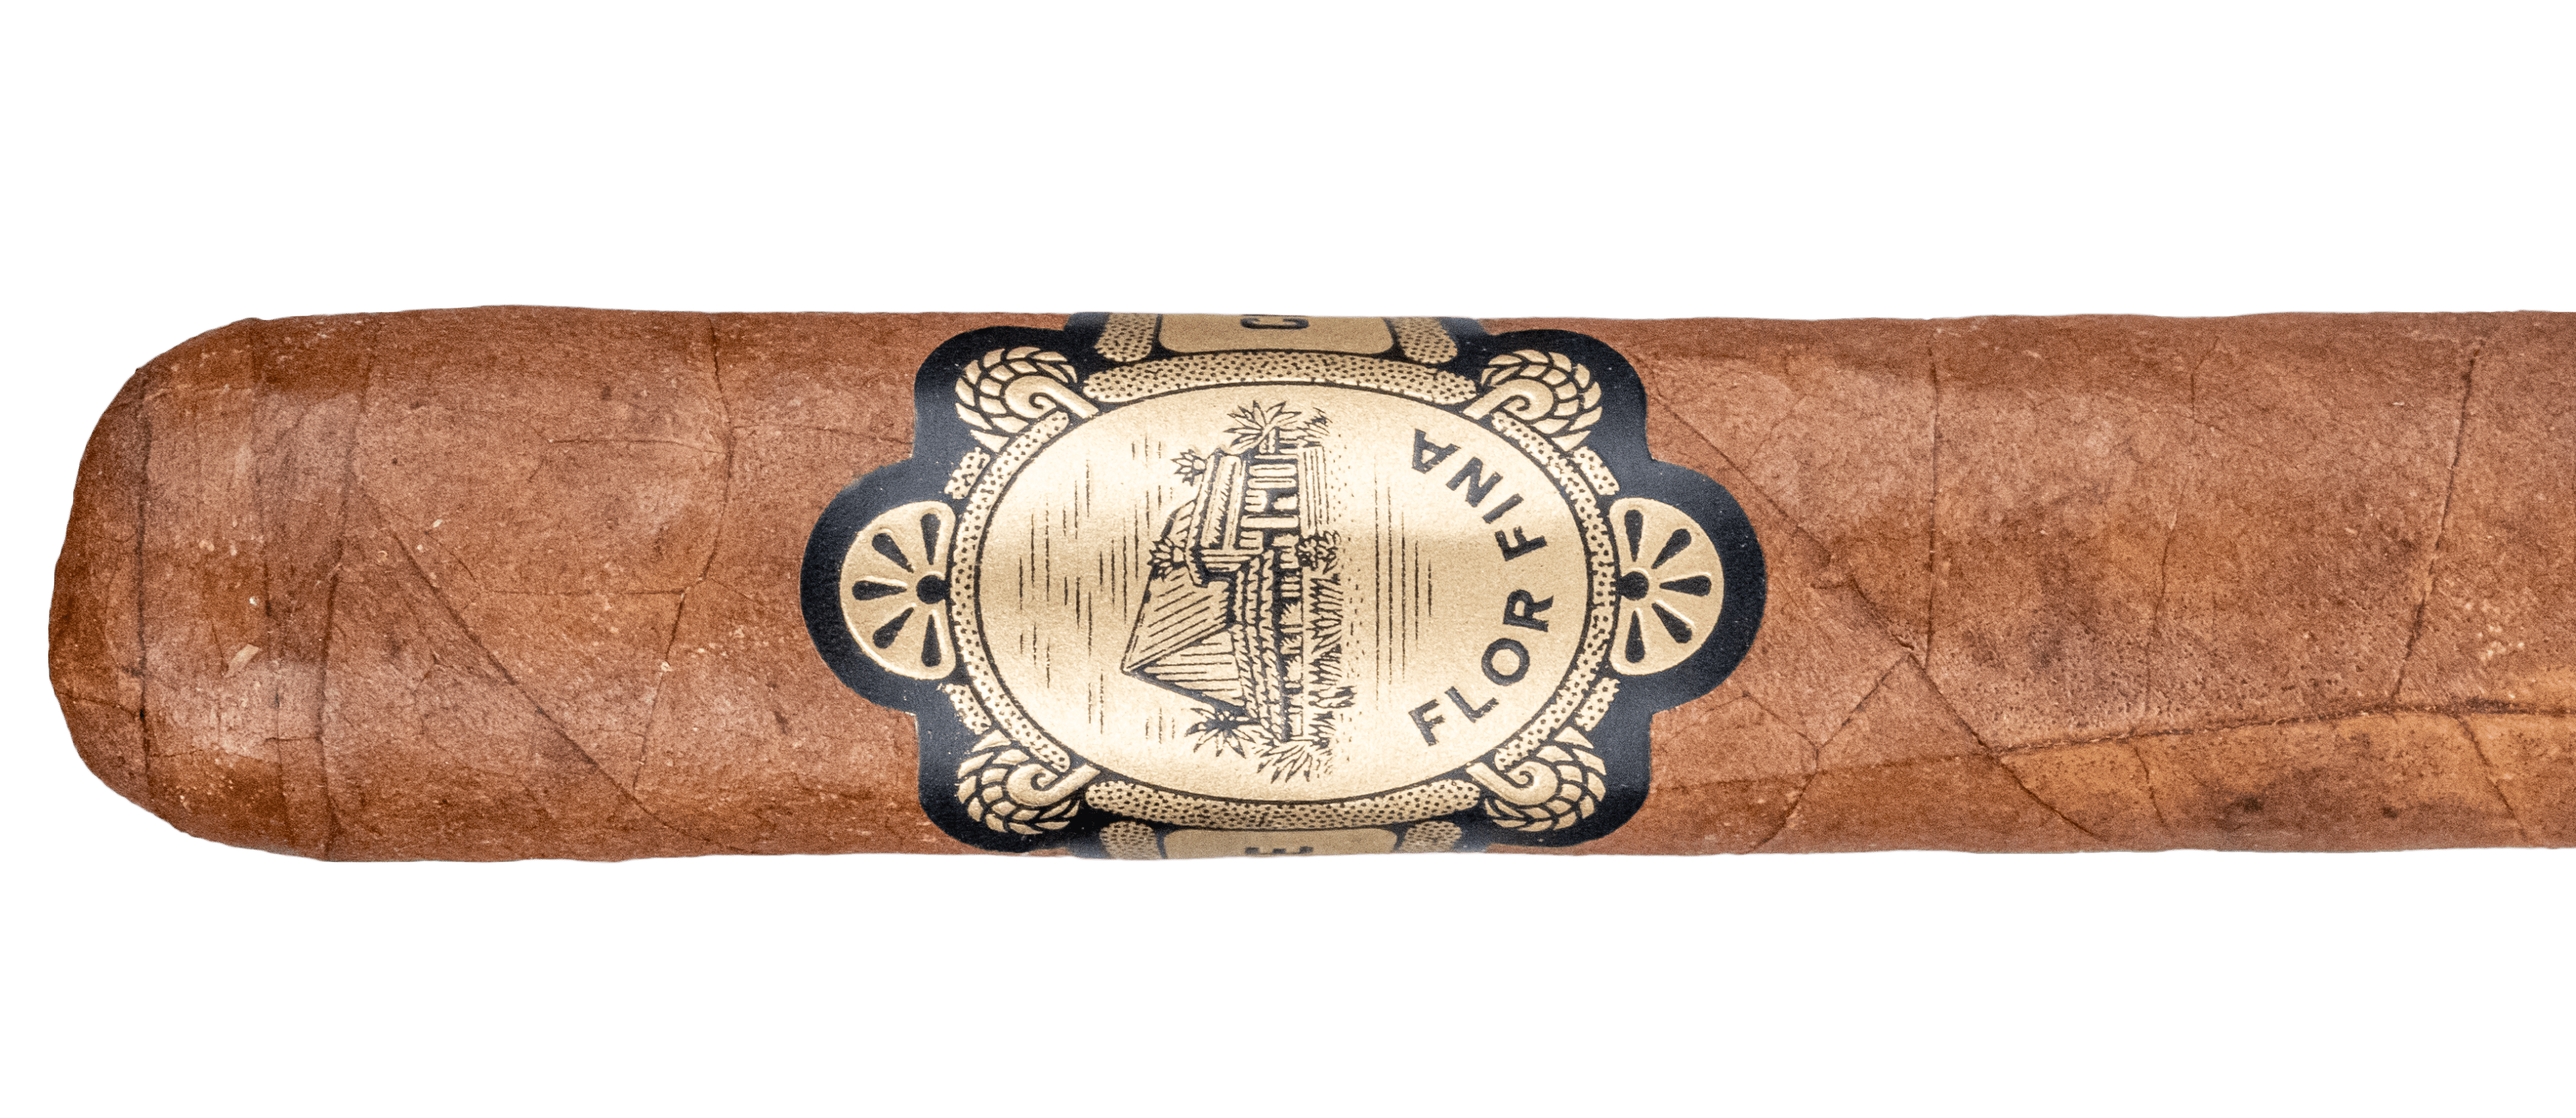 Warped Chinchalle - Blind Cigar Review